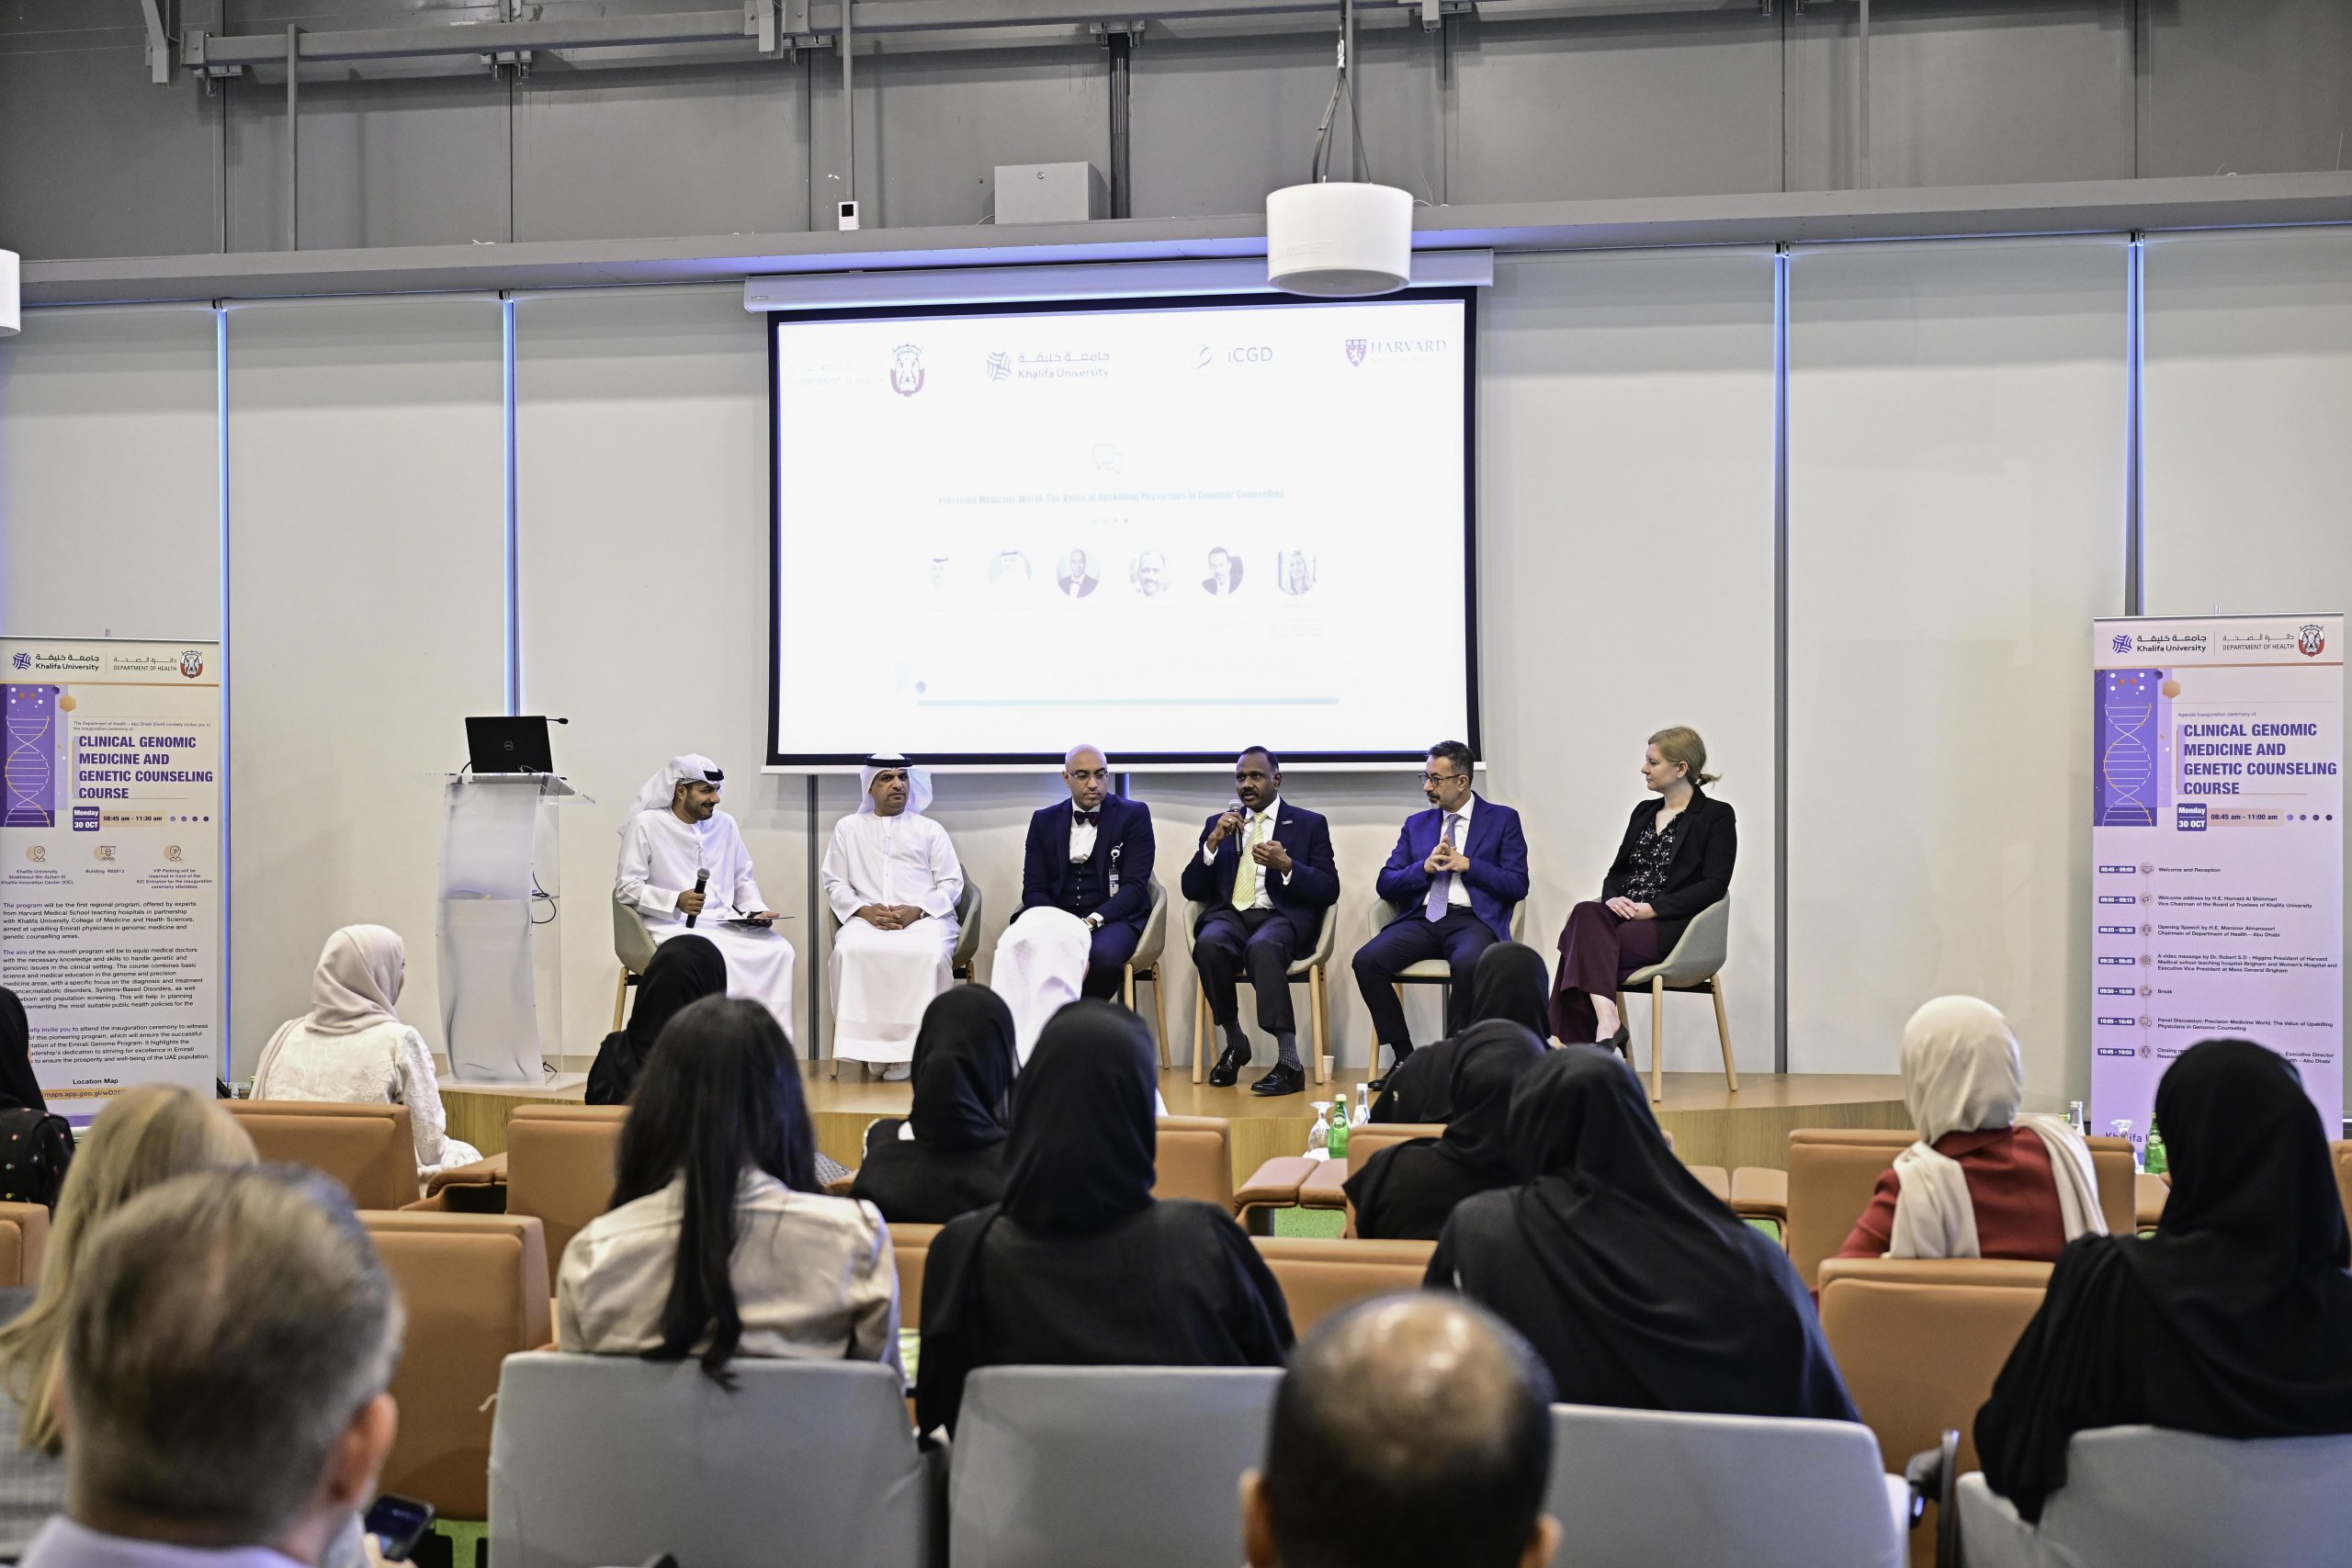 Abu Dhabi launches Clinical Genomic Medicine and Genetic Counselling course